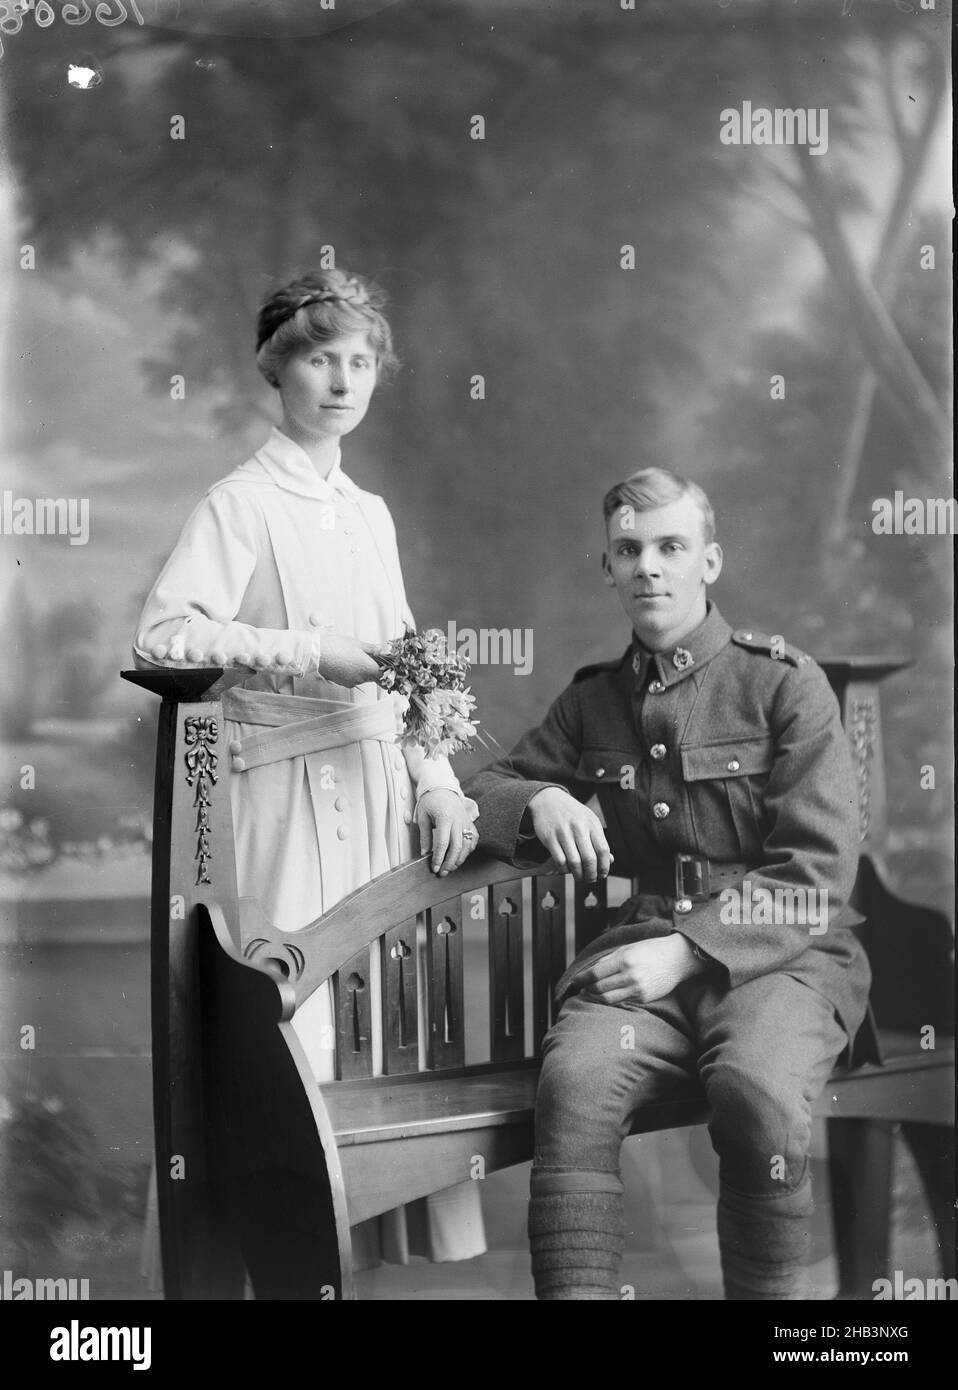 Private James Arthur Hoverd and his bride Florence Lilian Davies, Berry & Co, photography studio, 20 July 1918, Wellington, Wedding portrait of Private James Arthur Hoverd and Florence Lilian Hoverd Stock Photo